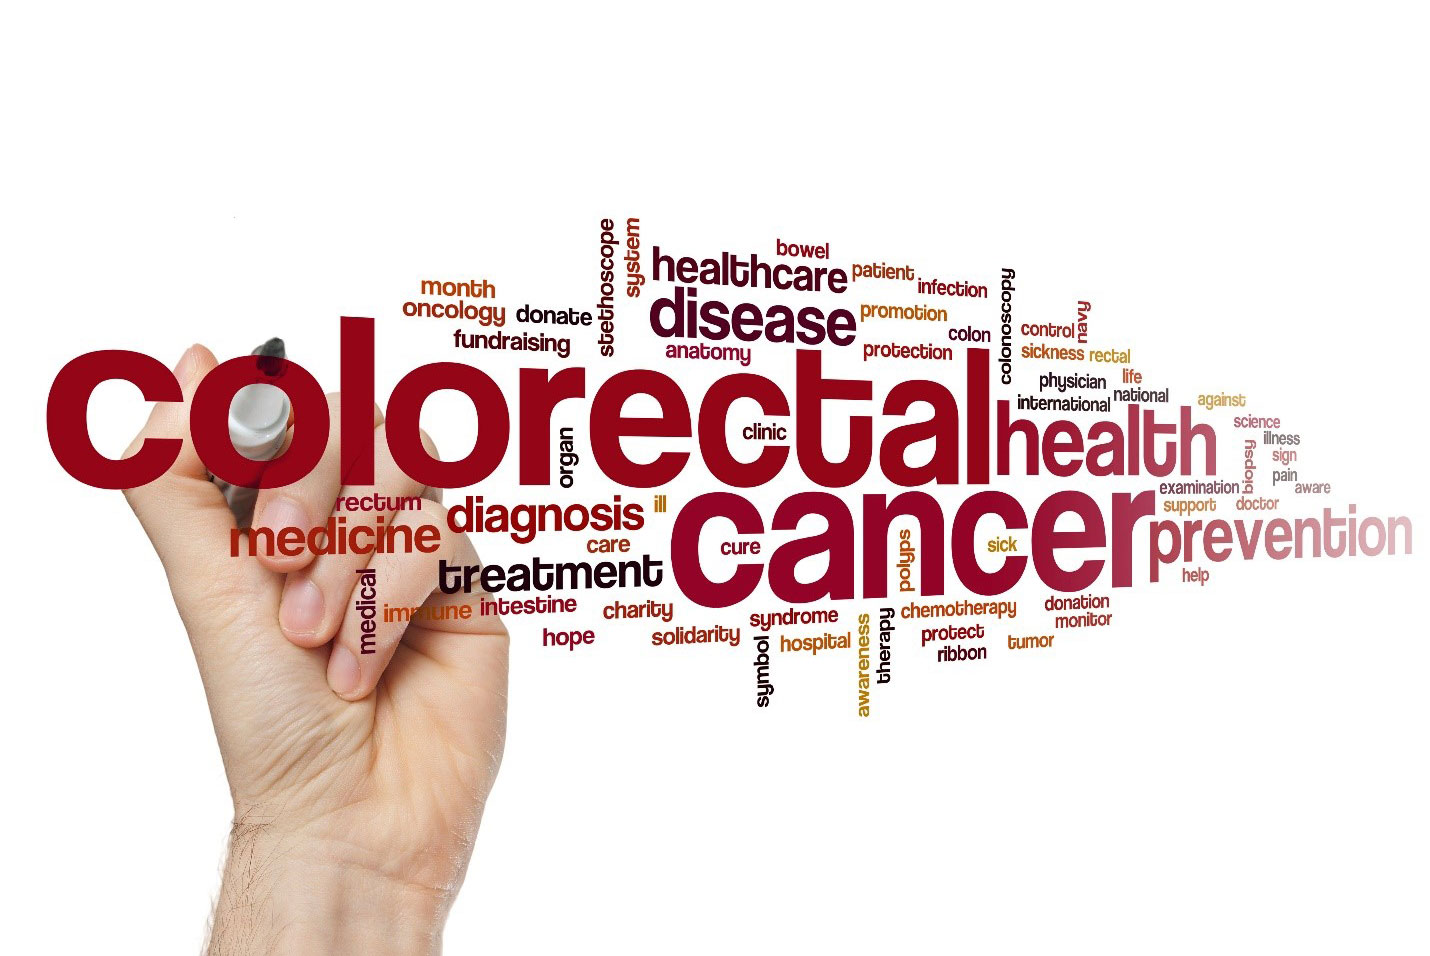 Facts about Colorectal Cancer